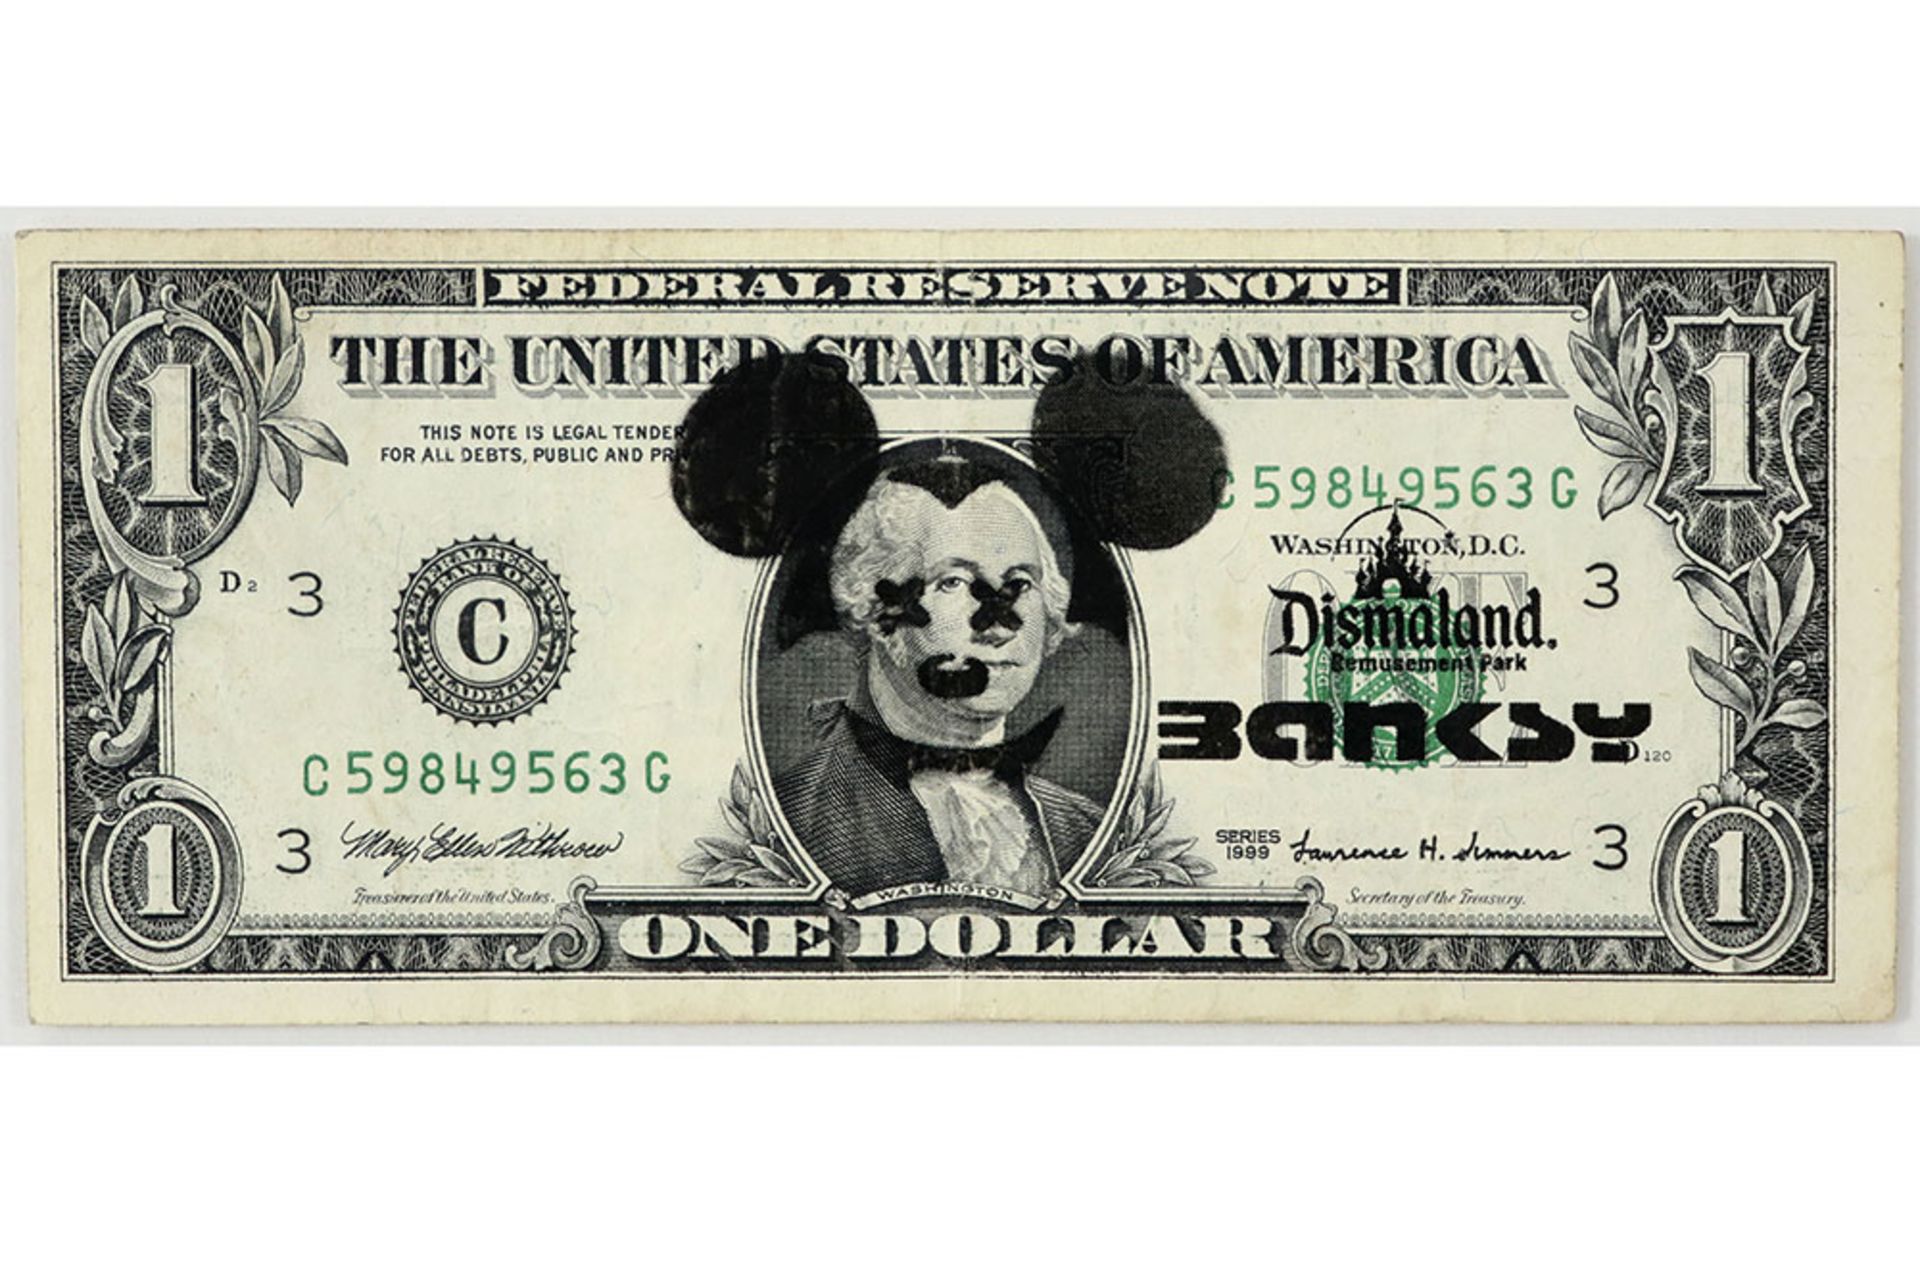 Banksy "Dismaland One Dollar" banknote print on canvas with Mickey Mouse dd 2015 with on the back